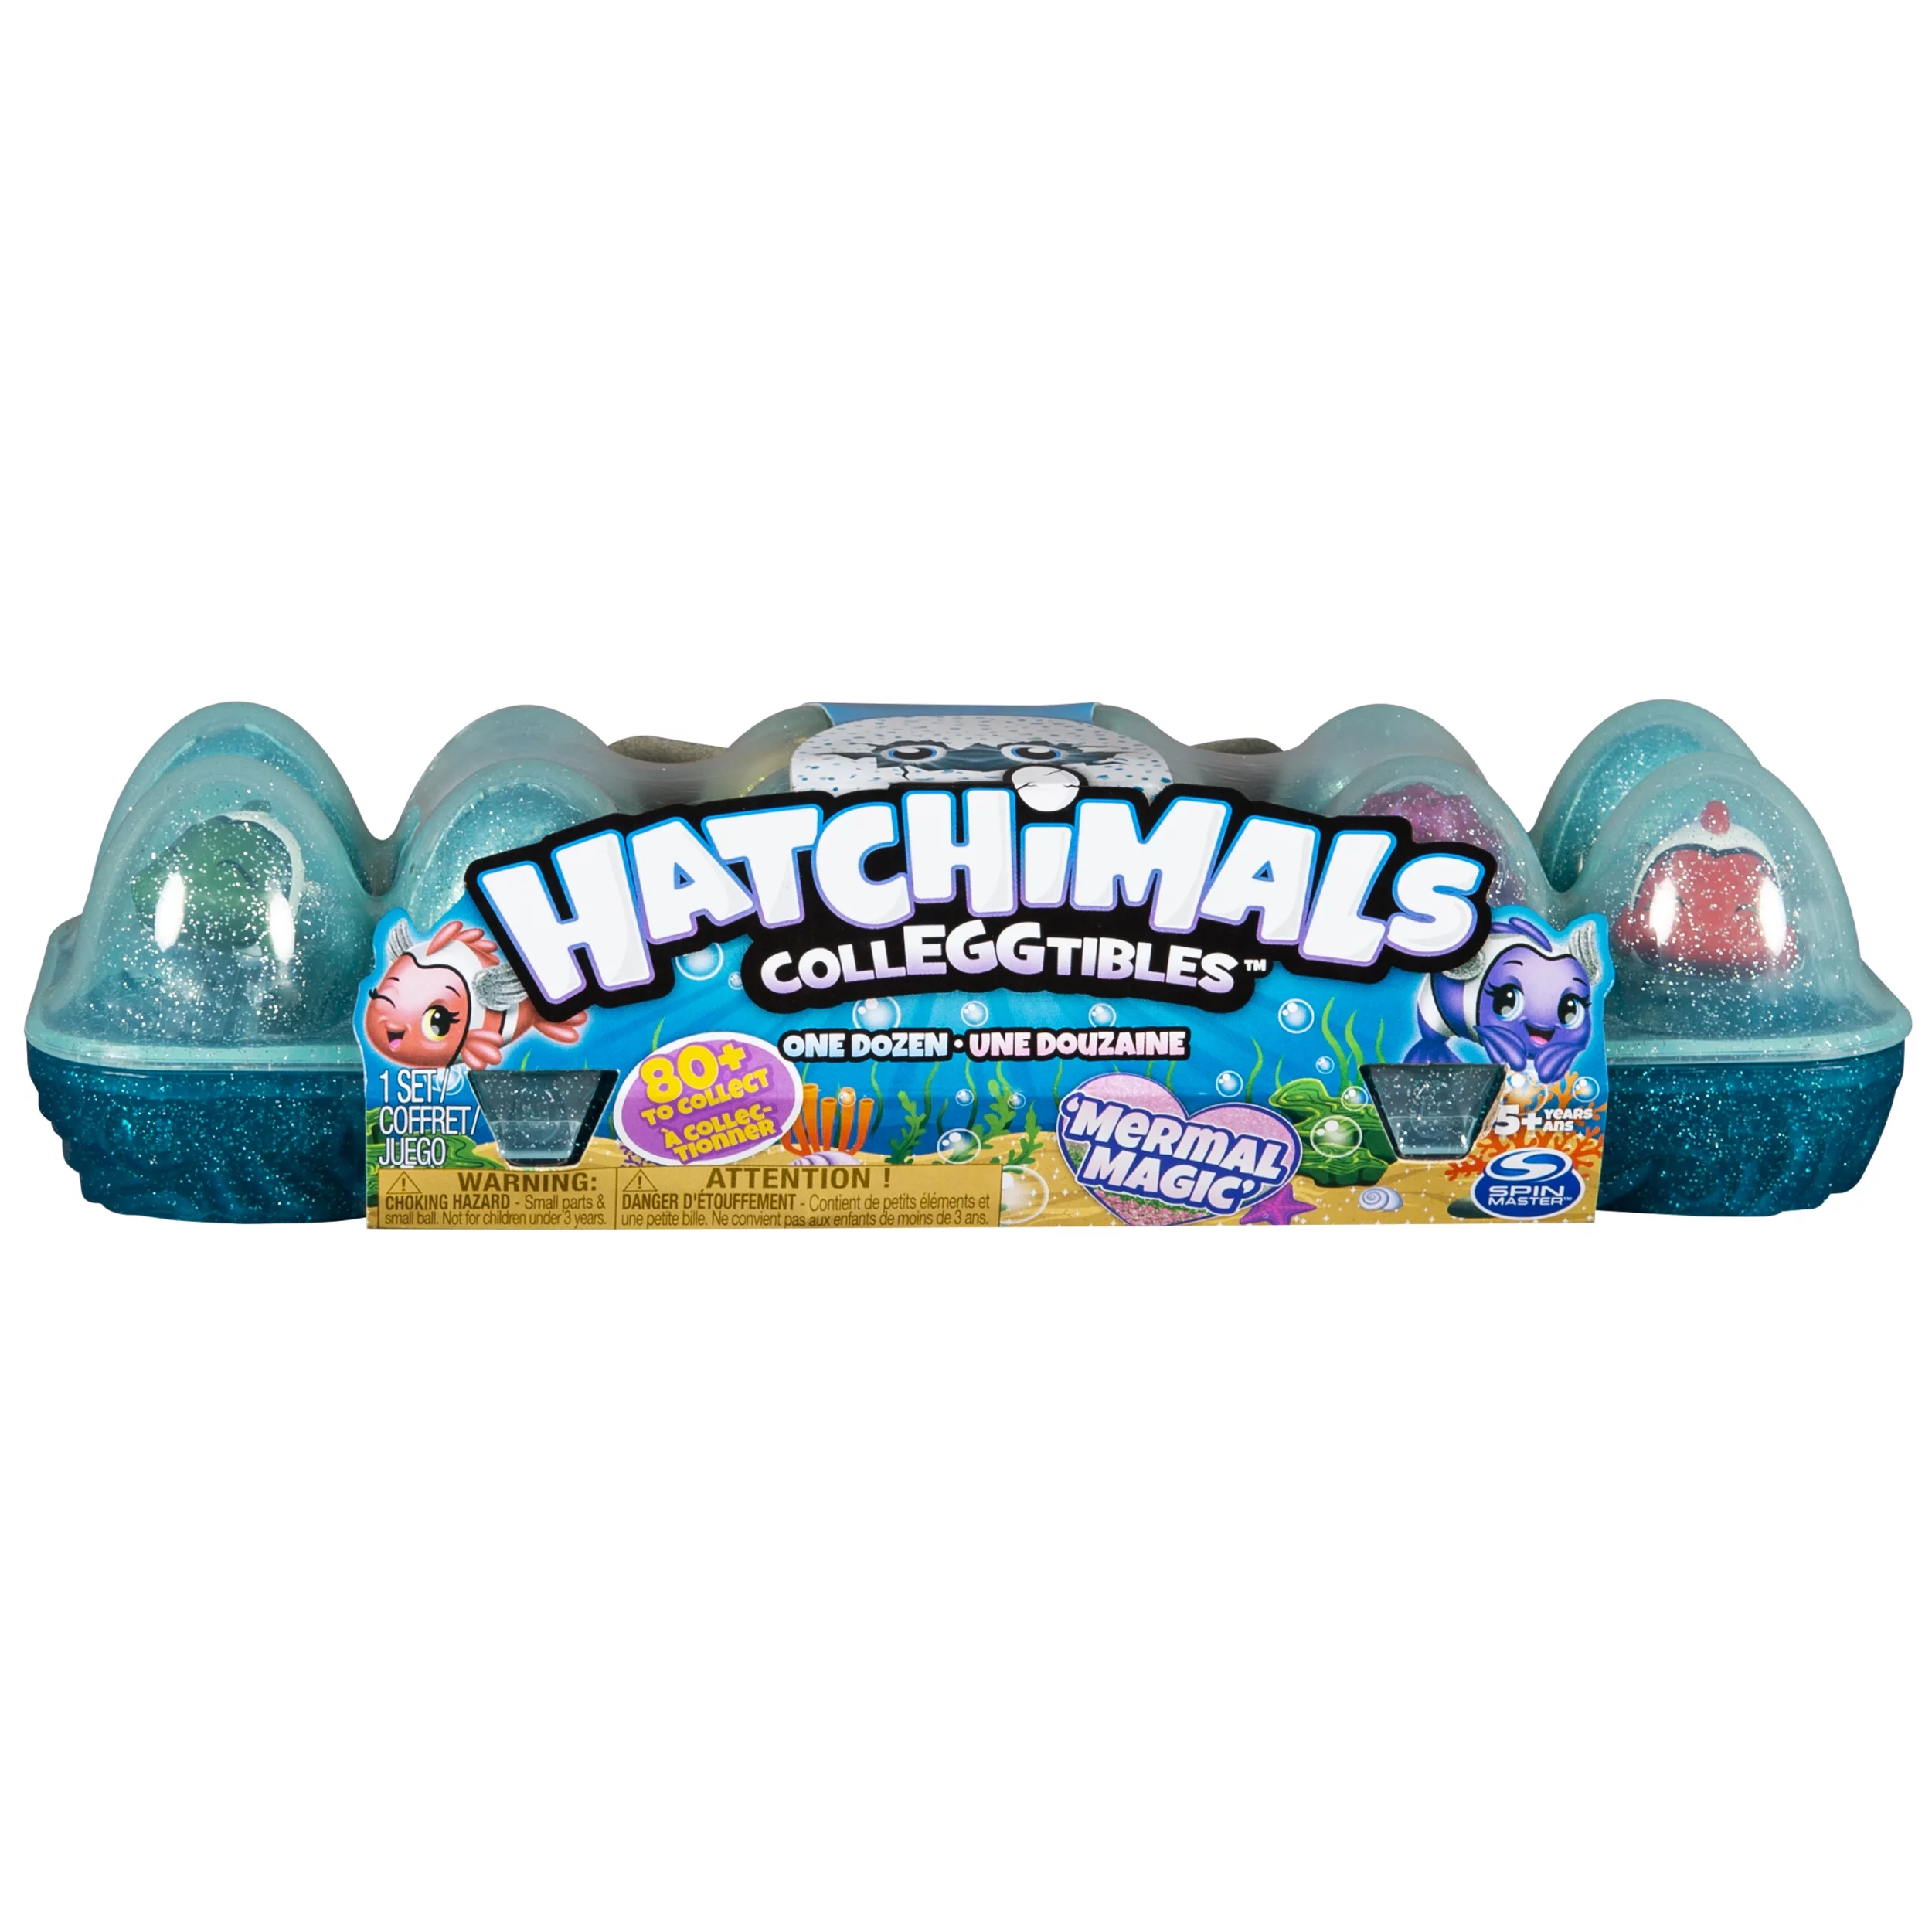 Hatchimals CollEGGtibles, Mermal Magic 12 Pack Egg Carton with Season 5 Hatchimals, for Kids Aged 5 and up (Styles May Vary)